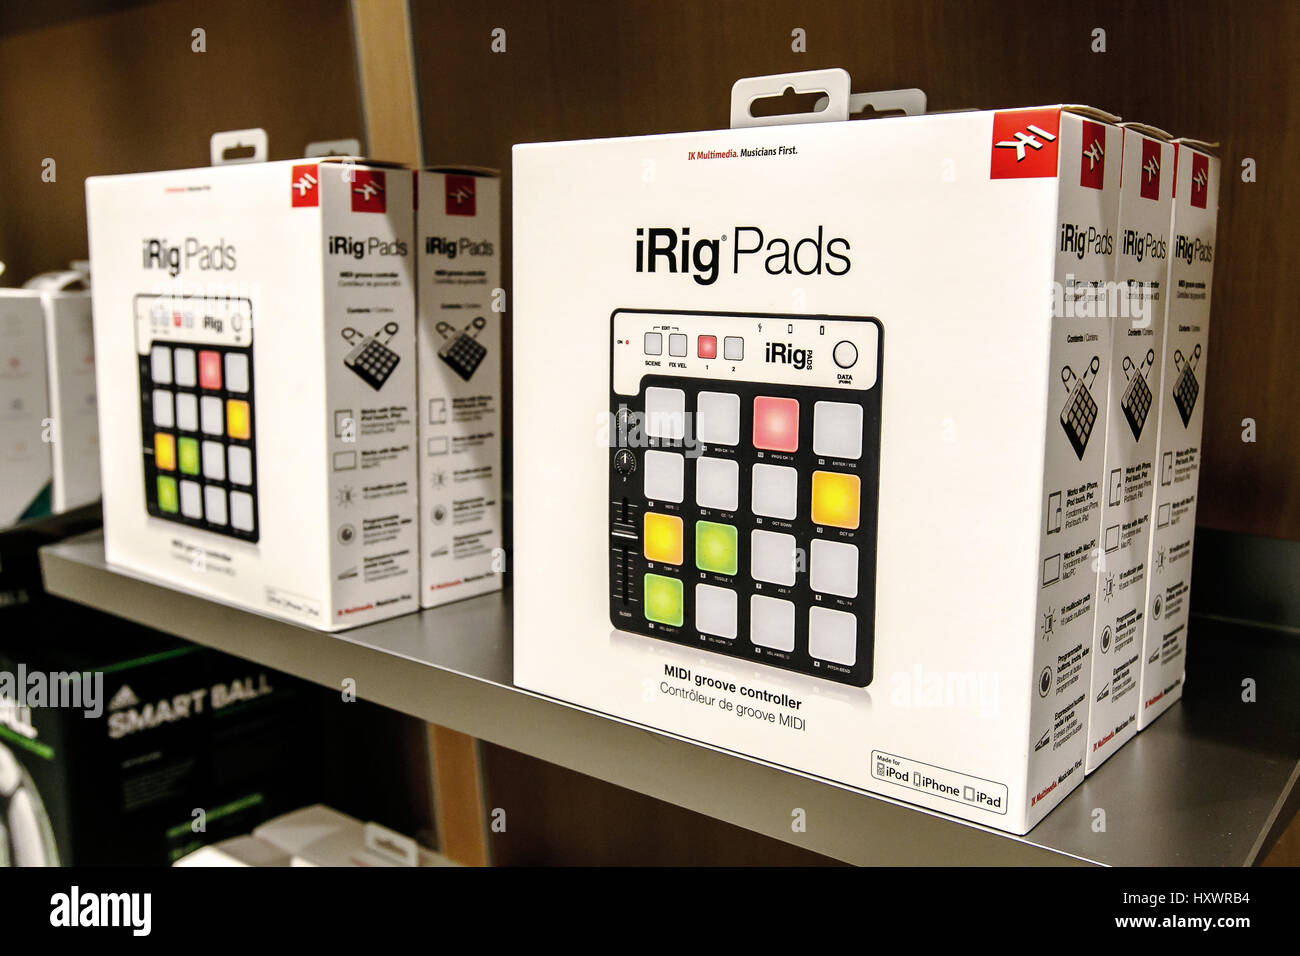 iRig Pads, an MIDI groove controller, is offered for sale in an